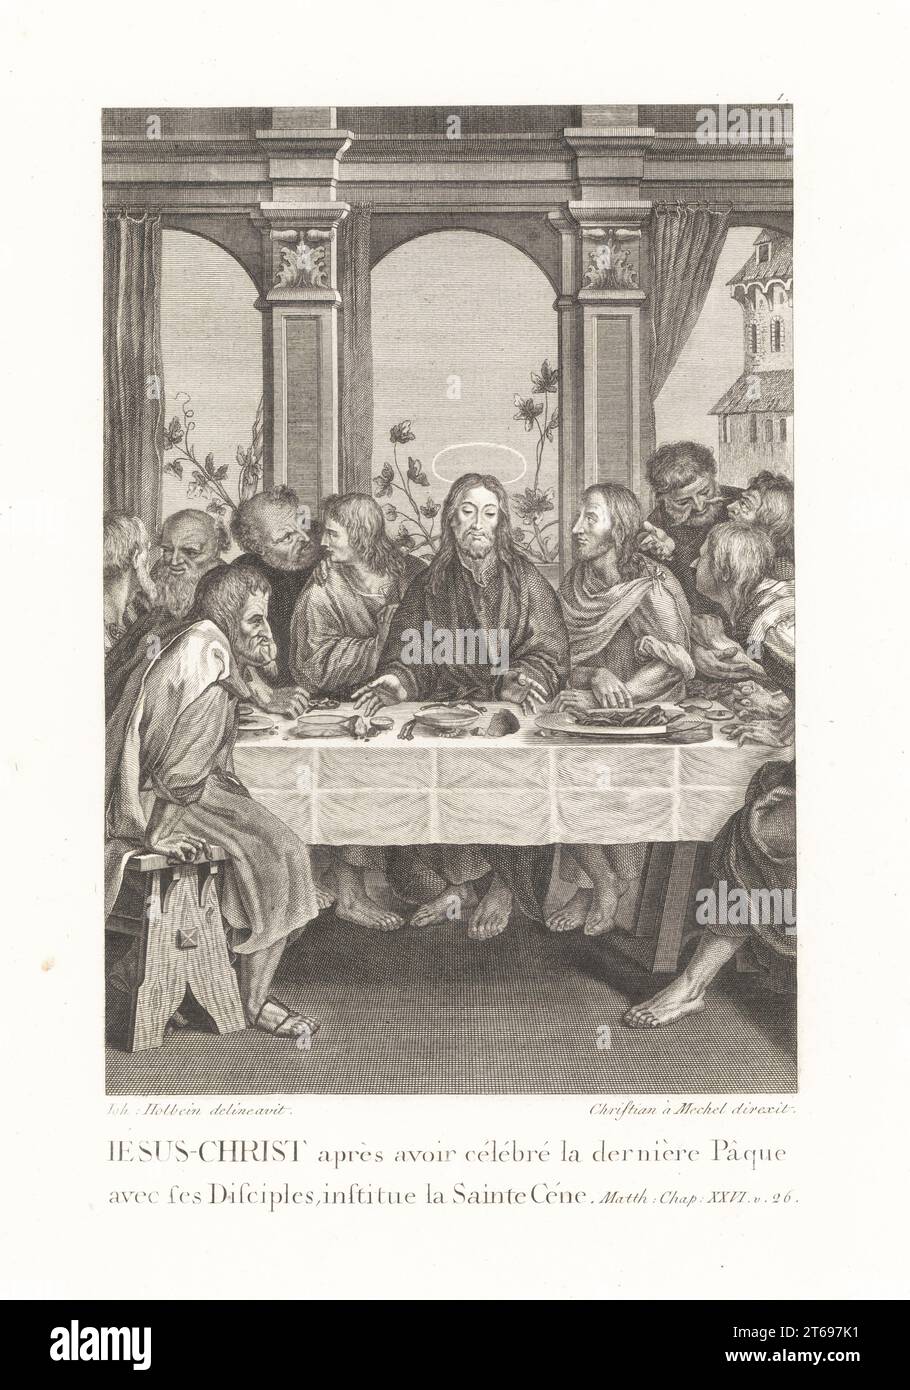 Jesus Christ and the apostles at the Last Supper. Jesus-Christ apres avoir celebre la derniere Paque ave ces Disciples. Matthew XXVI v. 26. From Le Passion de Notre Seigneur, The Passion of our Lord, 1784. Copperplate engraving by Christian Mechel after Hans Holbein in Christian von Mechel's Oeuvre de Jean Holbein, Chez Guillaume Haas, Basel, 1784. Stock Photo